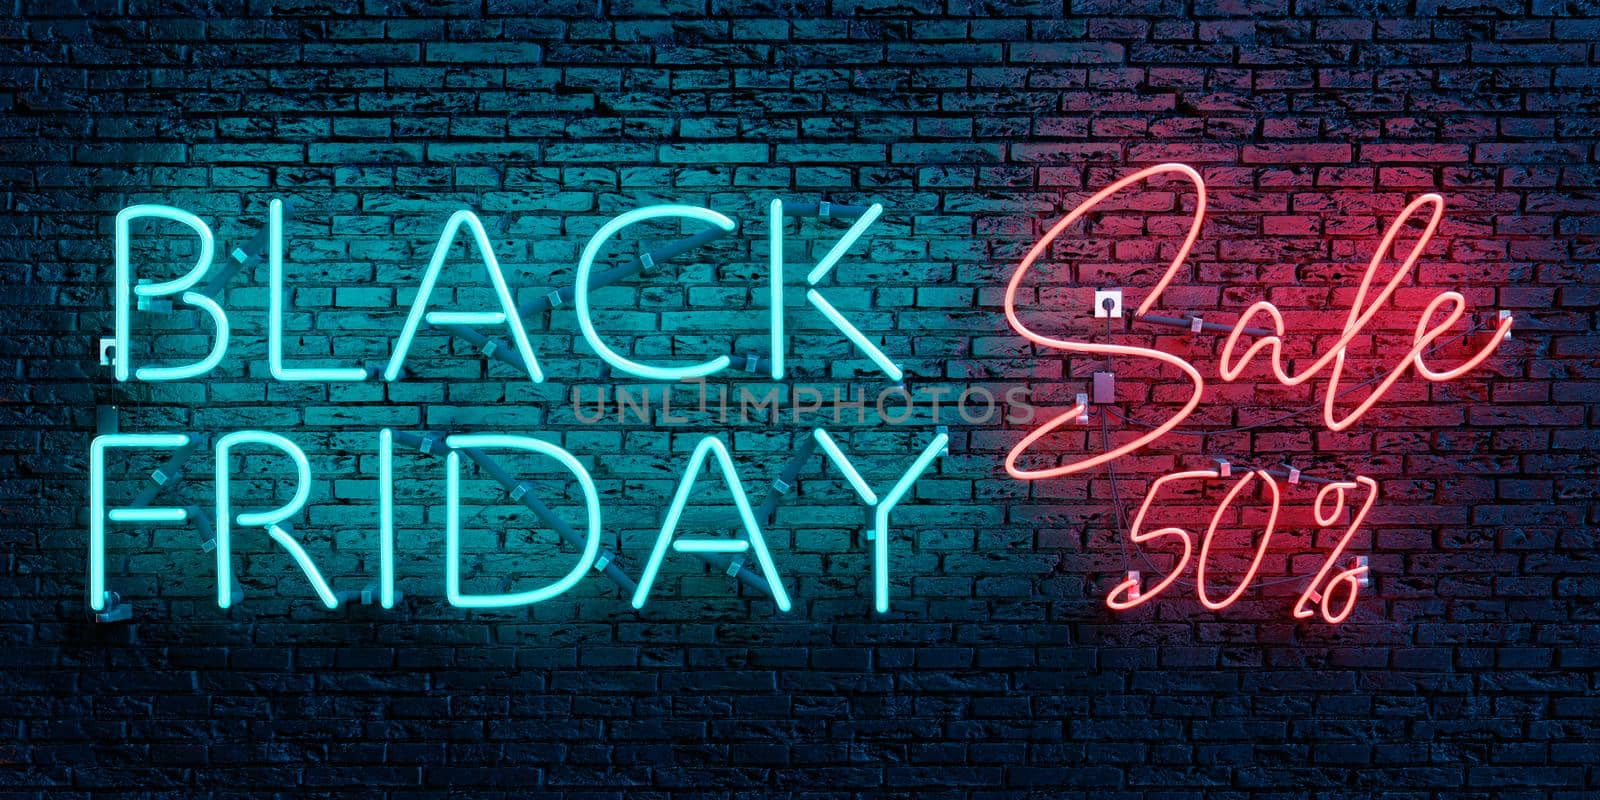 BLACK FRIDAY SALE 50 percent neon sign by asolano